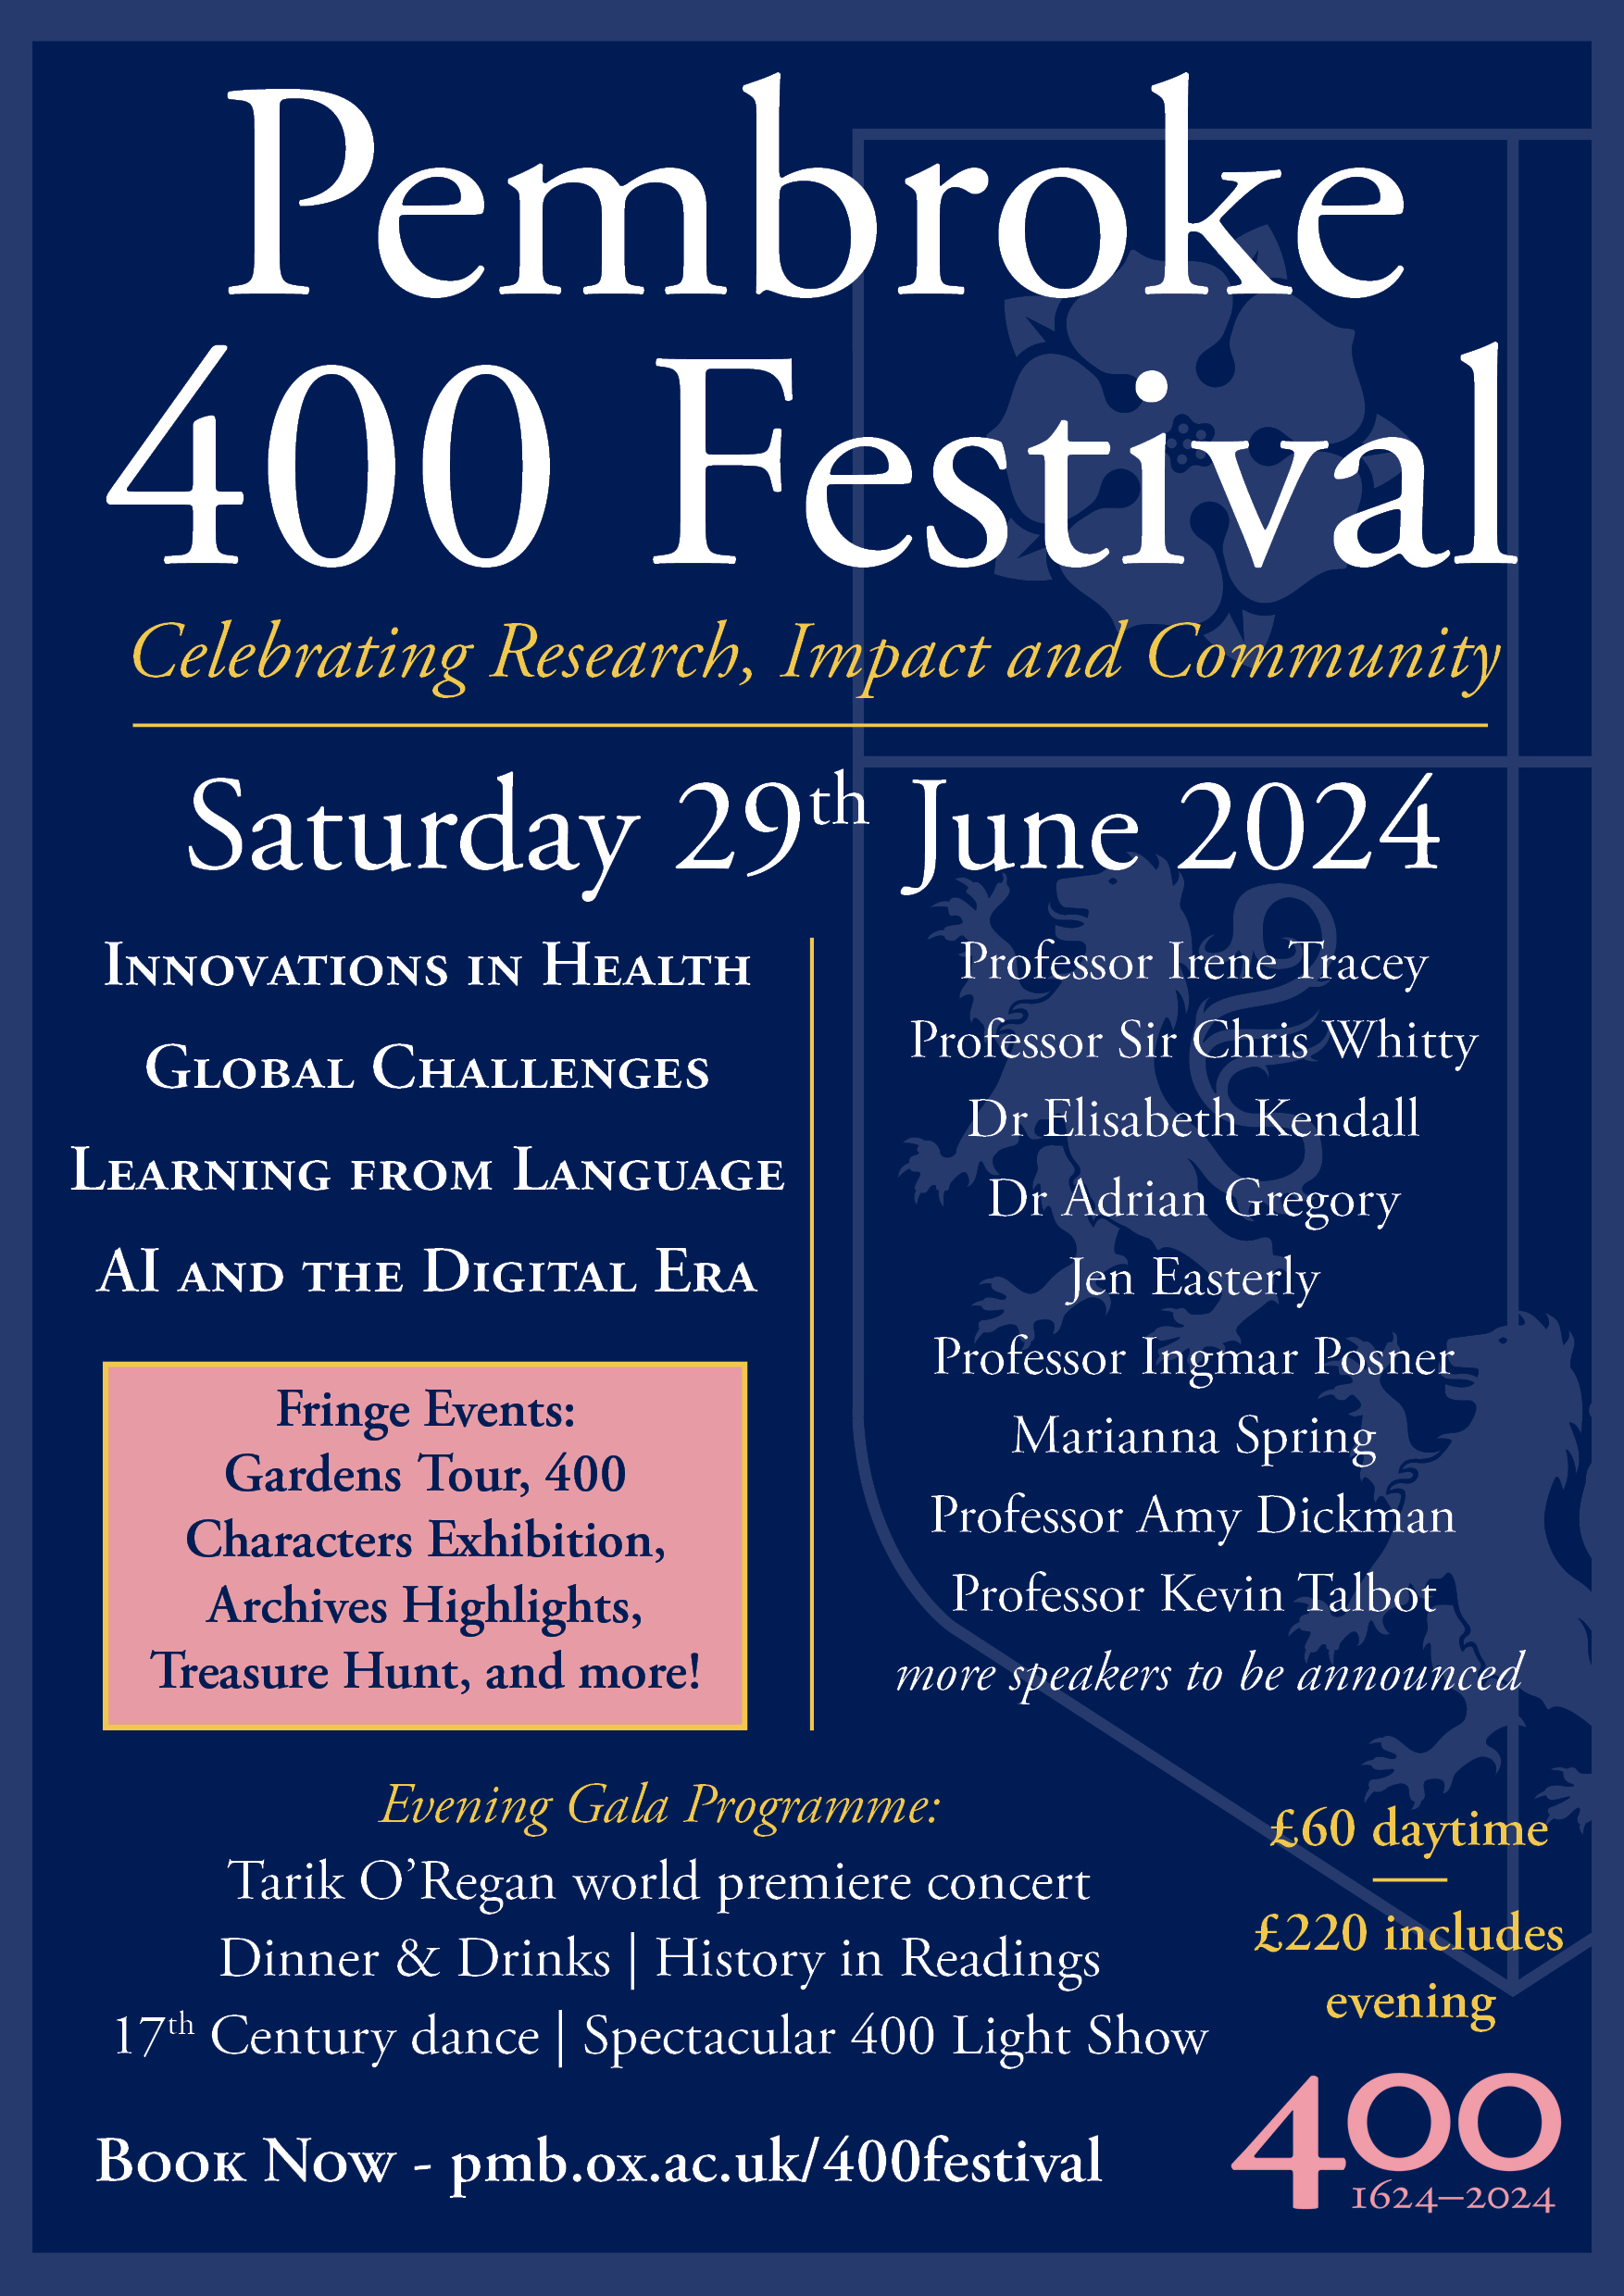 A poster for the Festival of Research and Impact. All details featured are included in the text above.